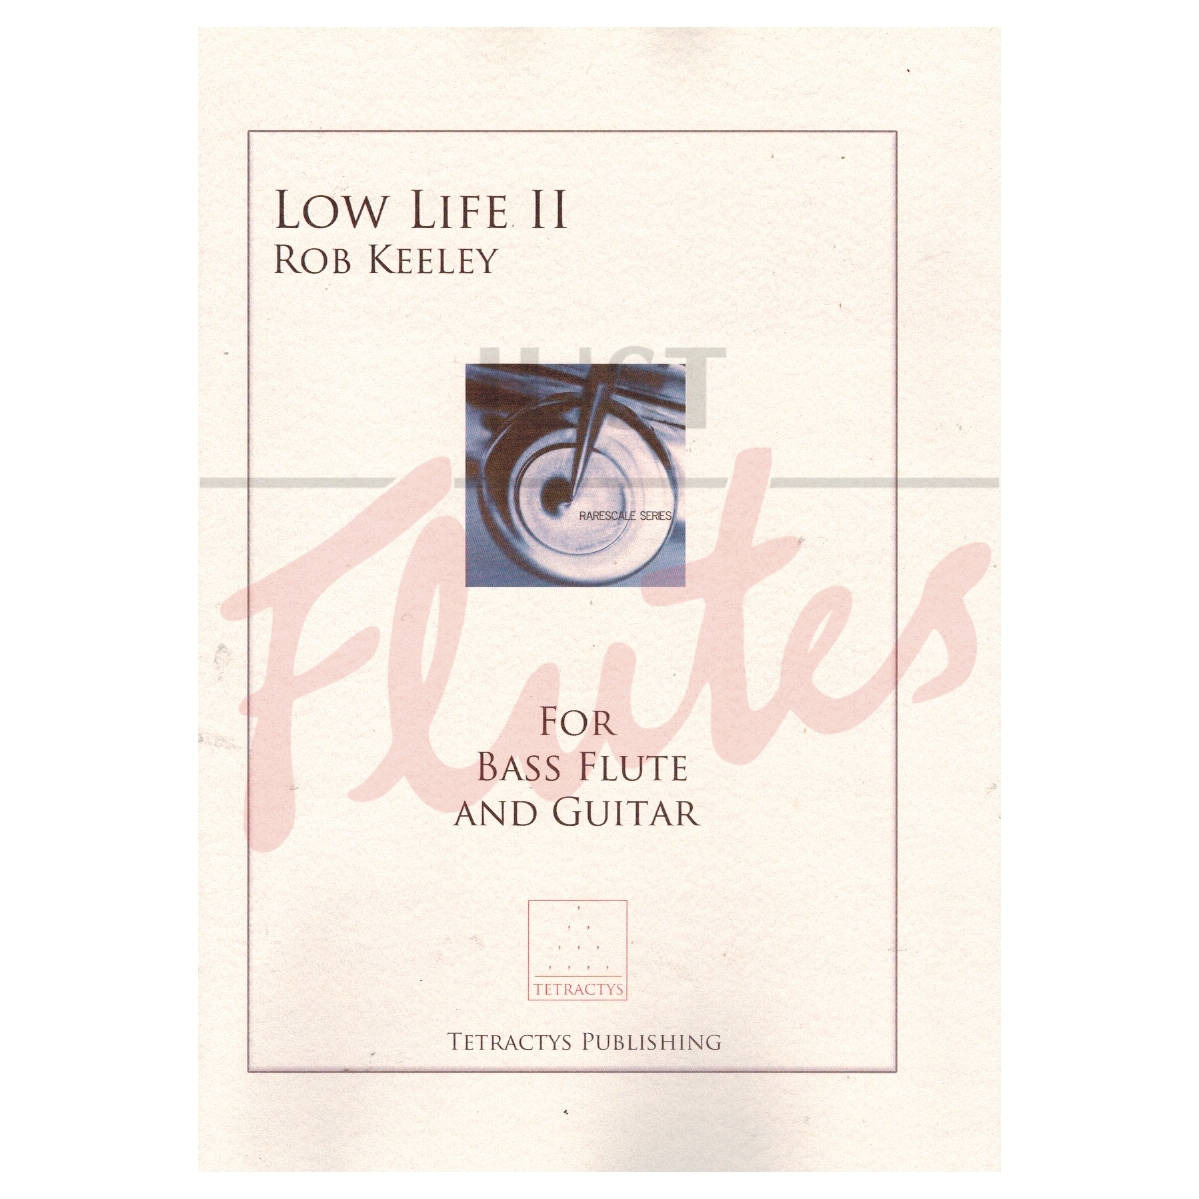 Low Life II for Bass Flute and Guitar